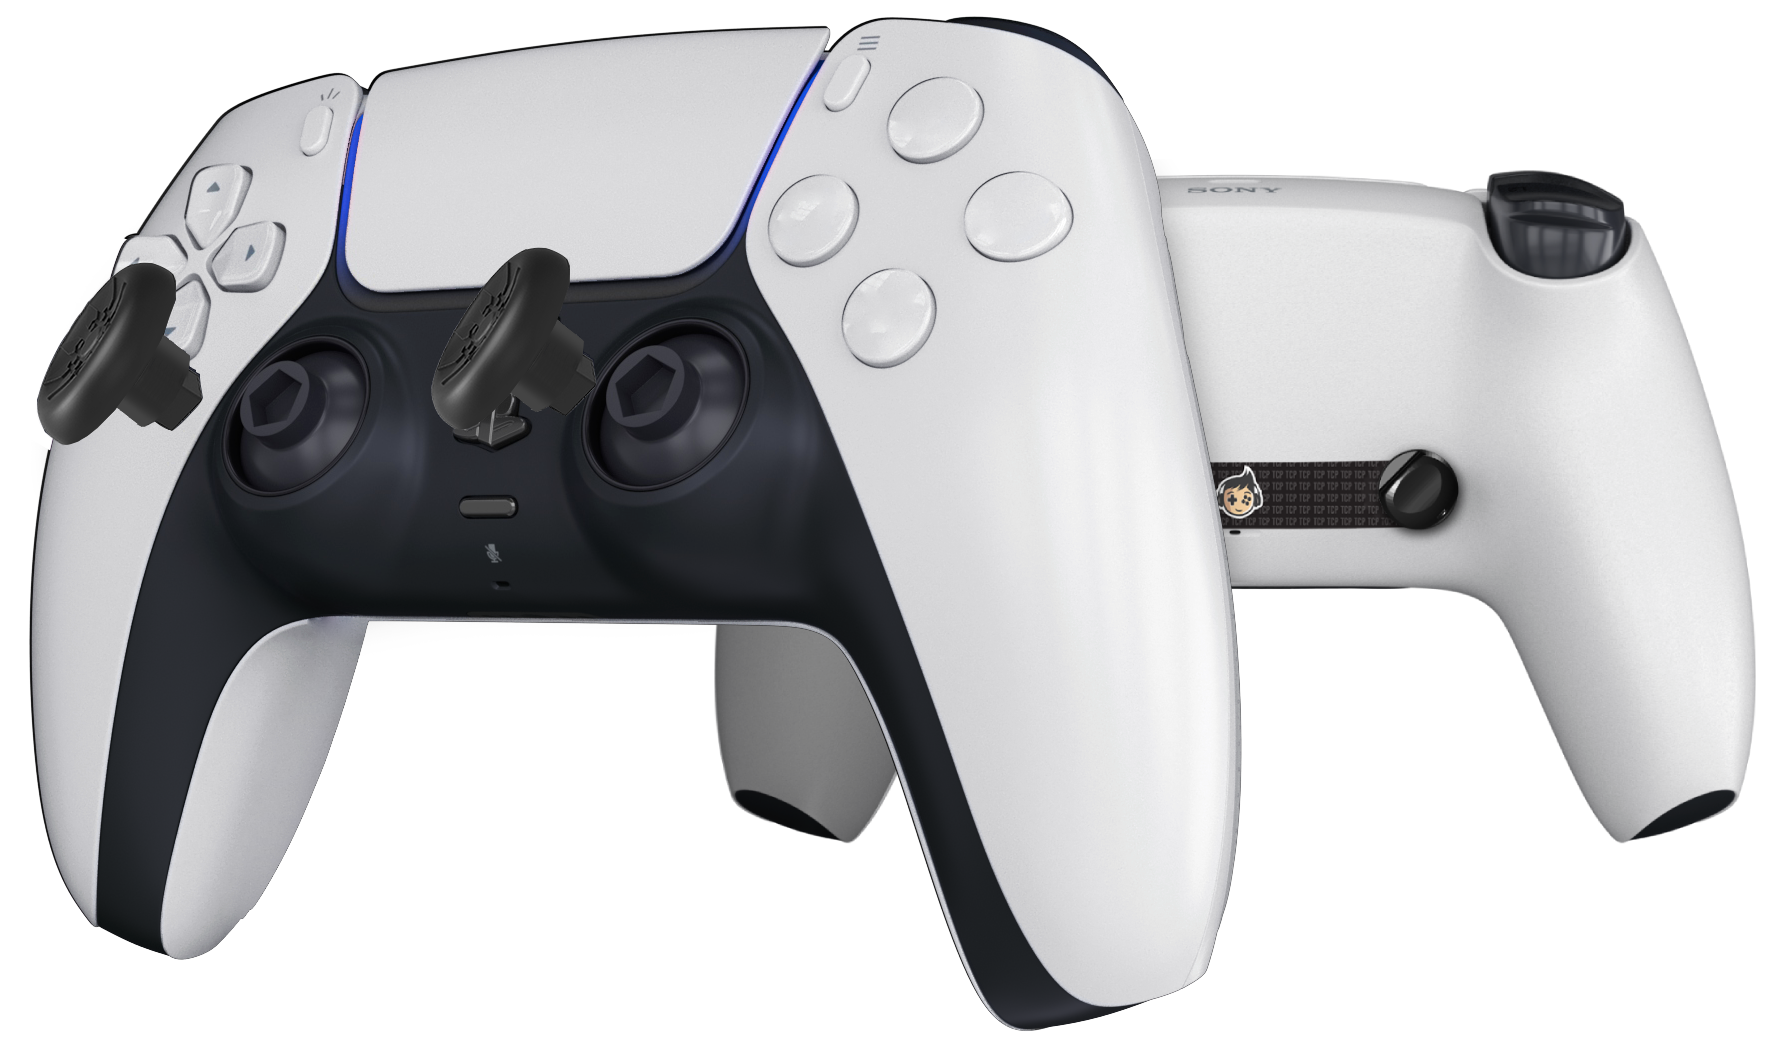 Make Your Own PS5 Custom Controller Mix and Match Your Playstation